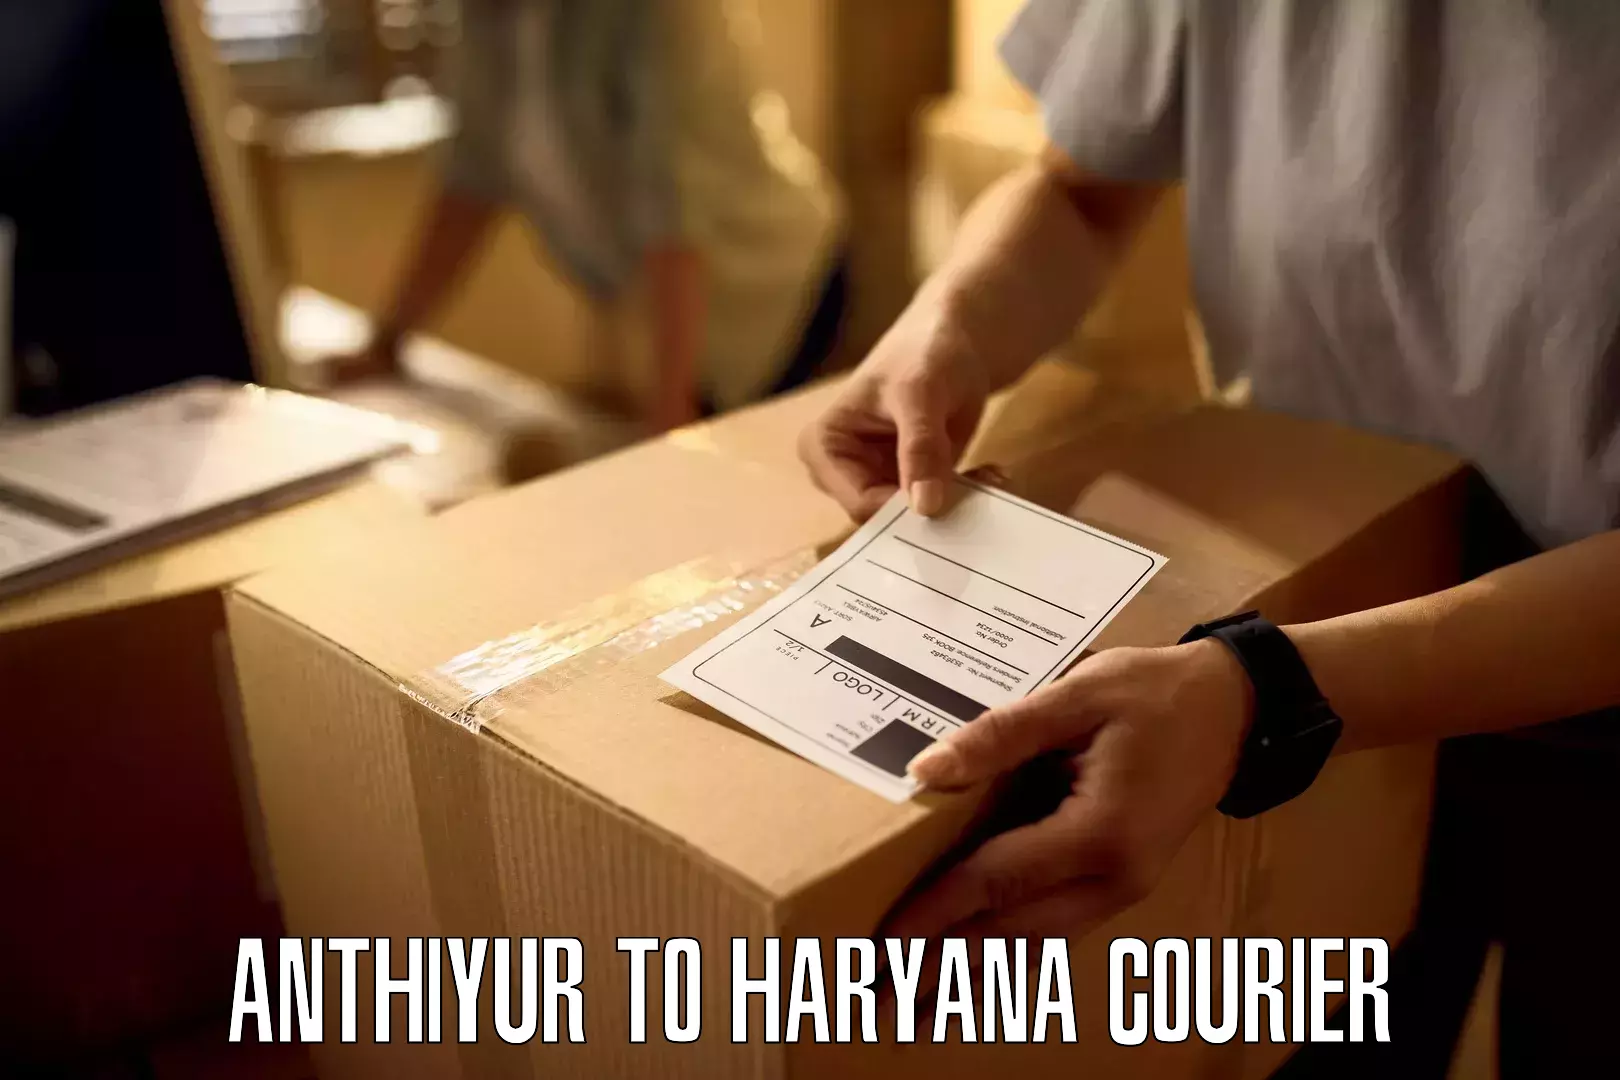 On-call courier service Anthiyur to Haryana